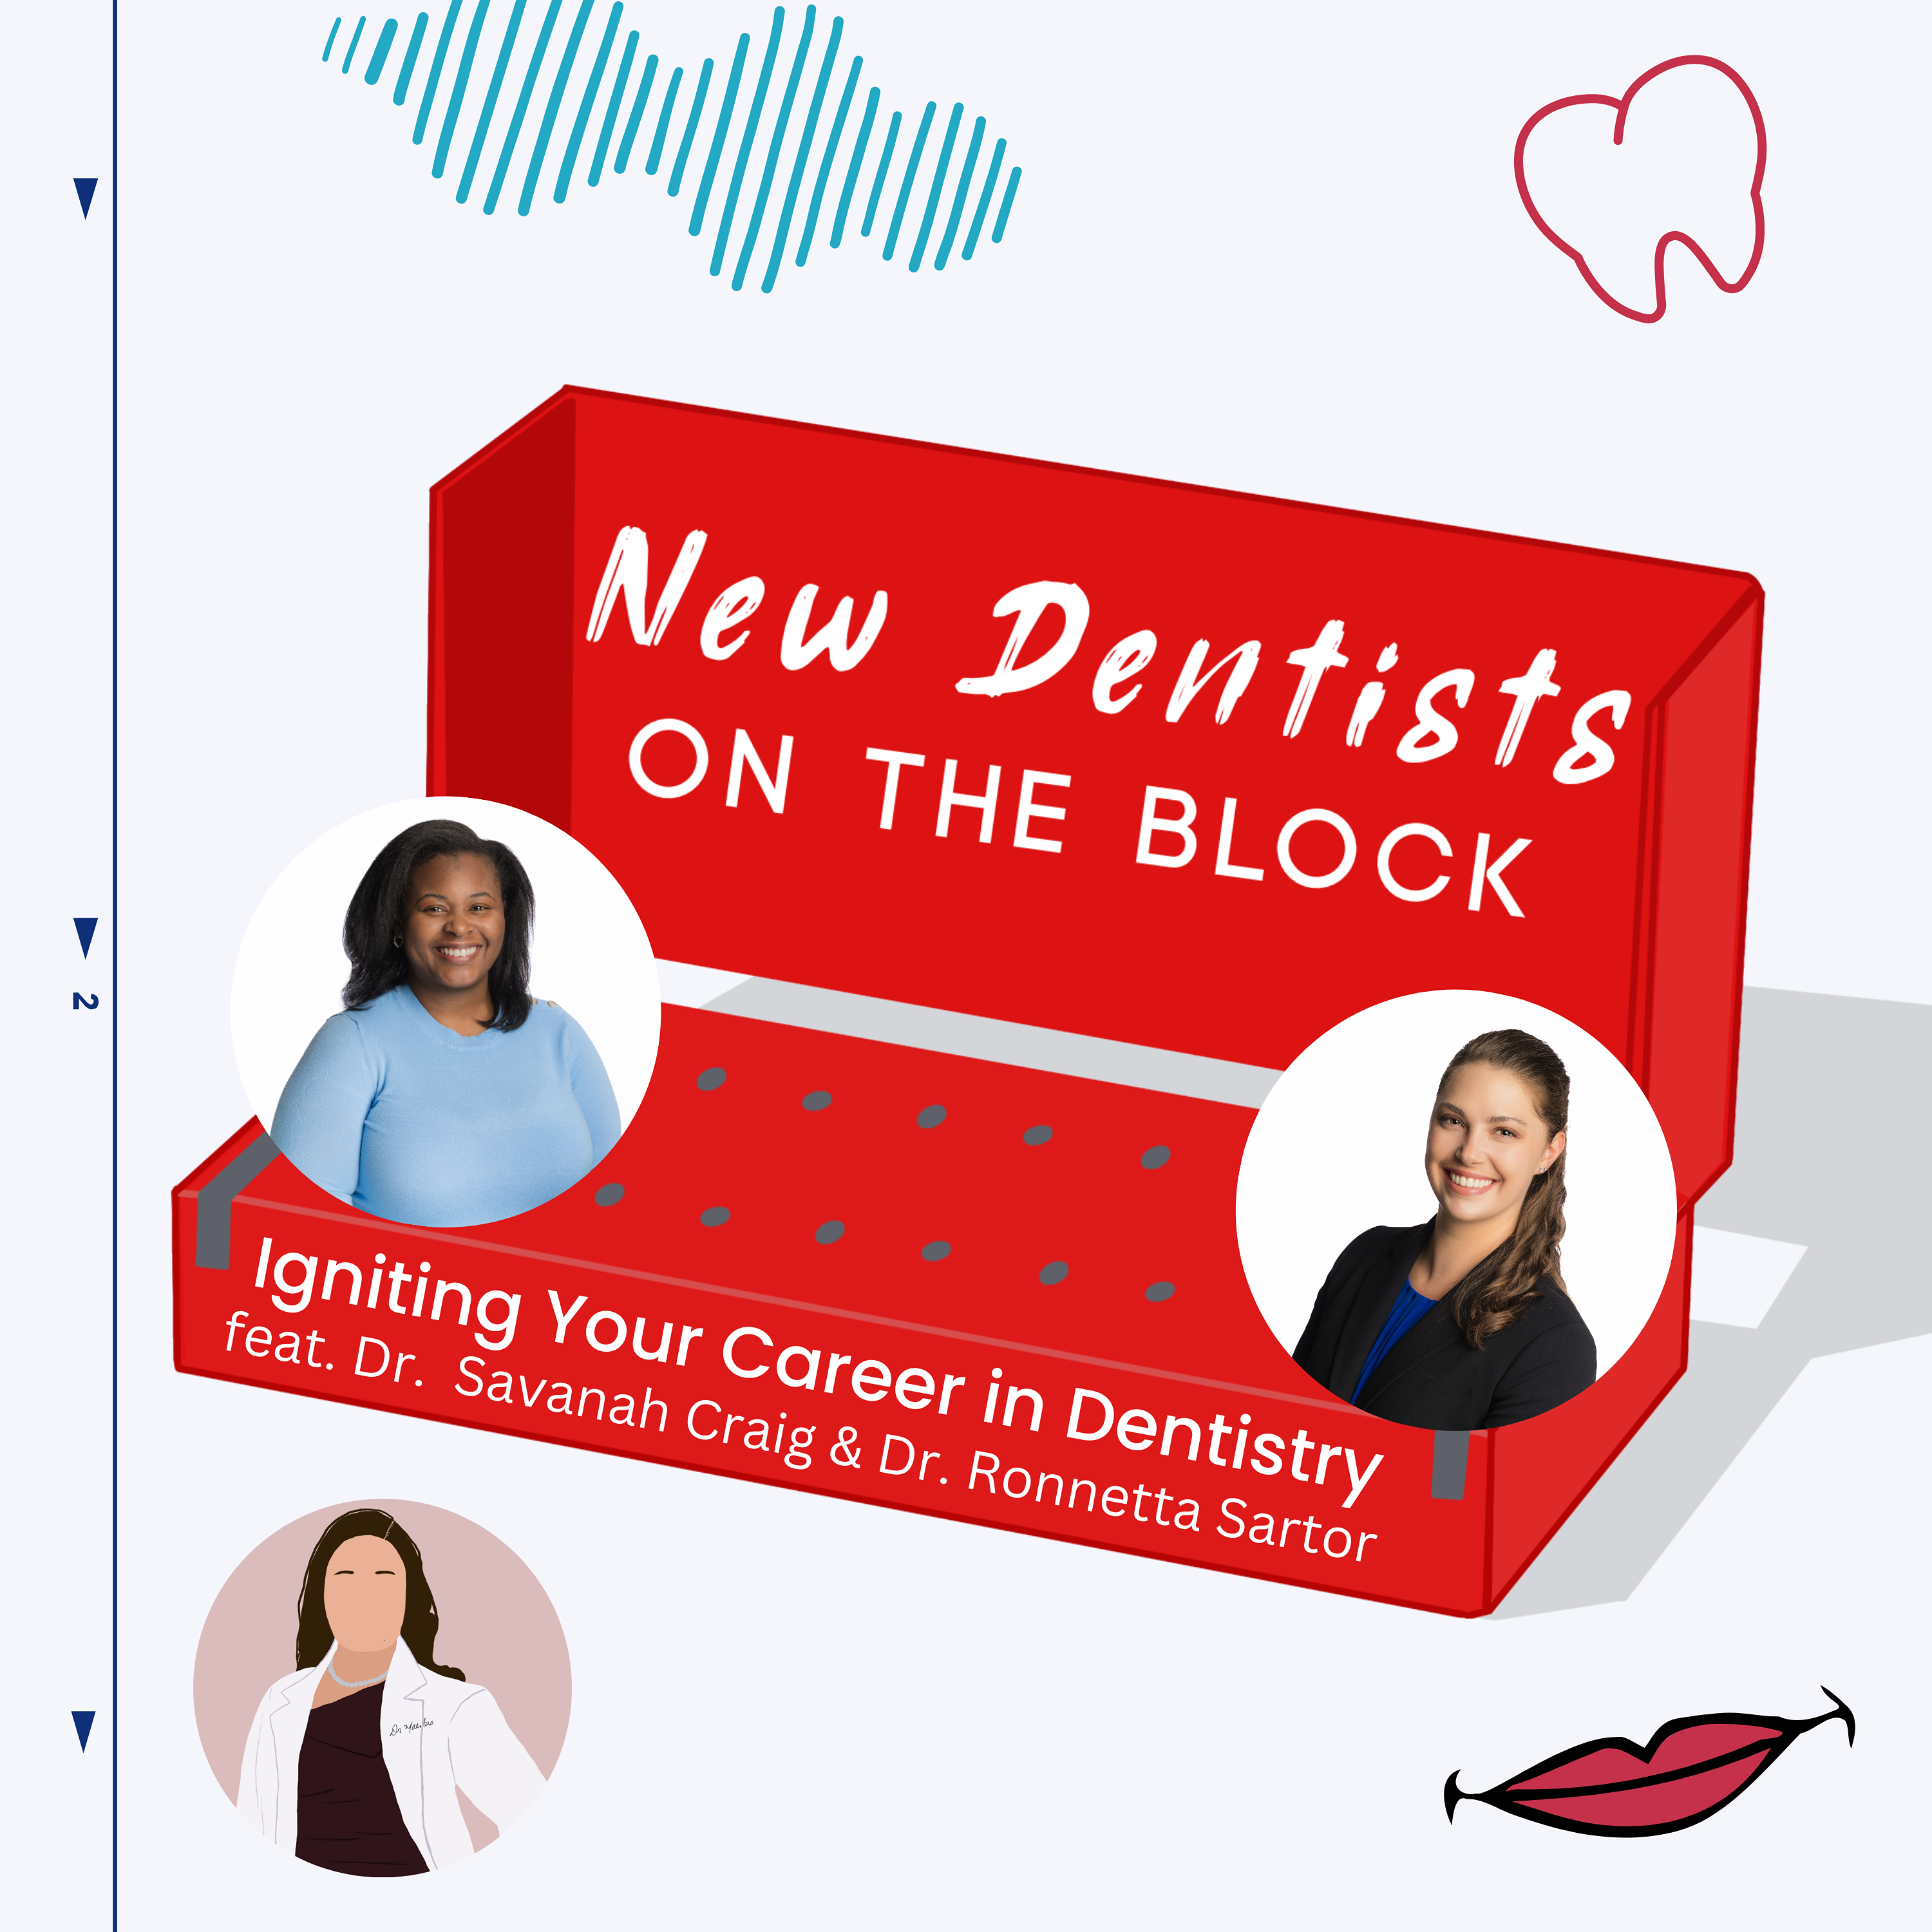 Igniting Your Career in Dentistry